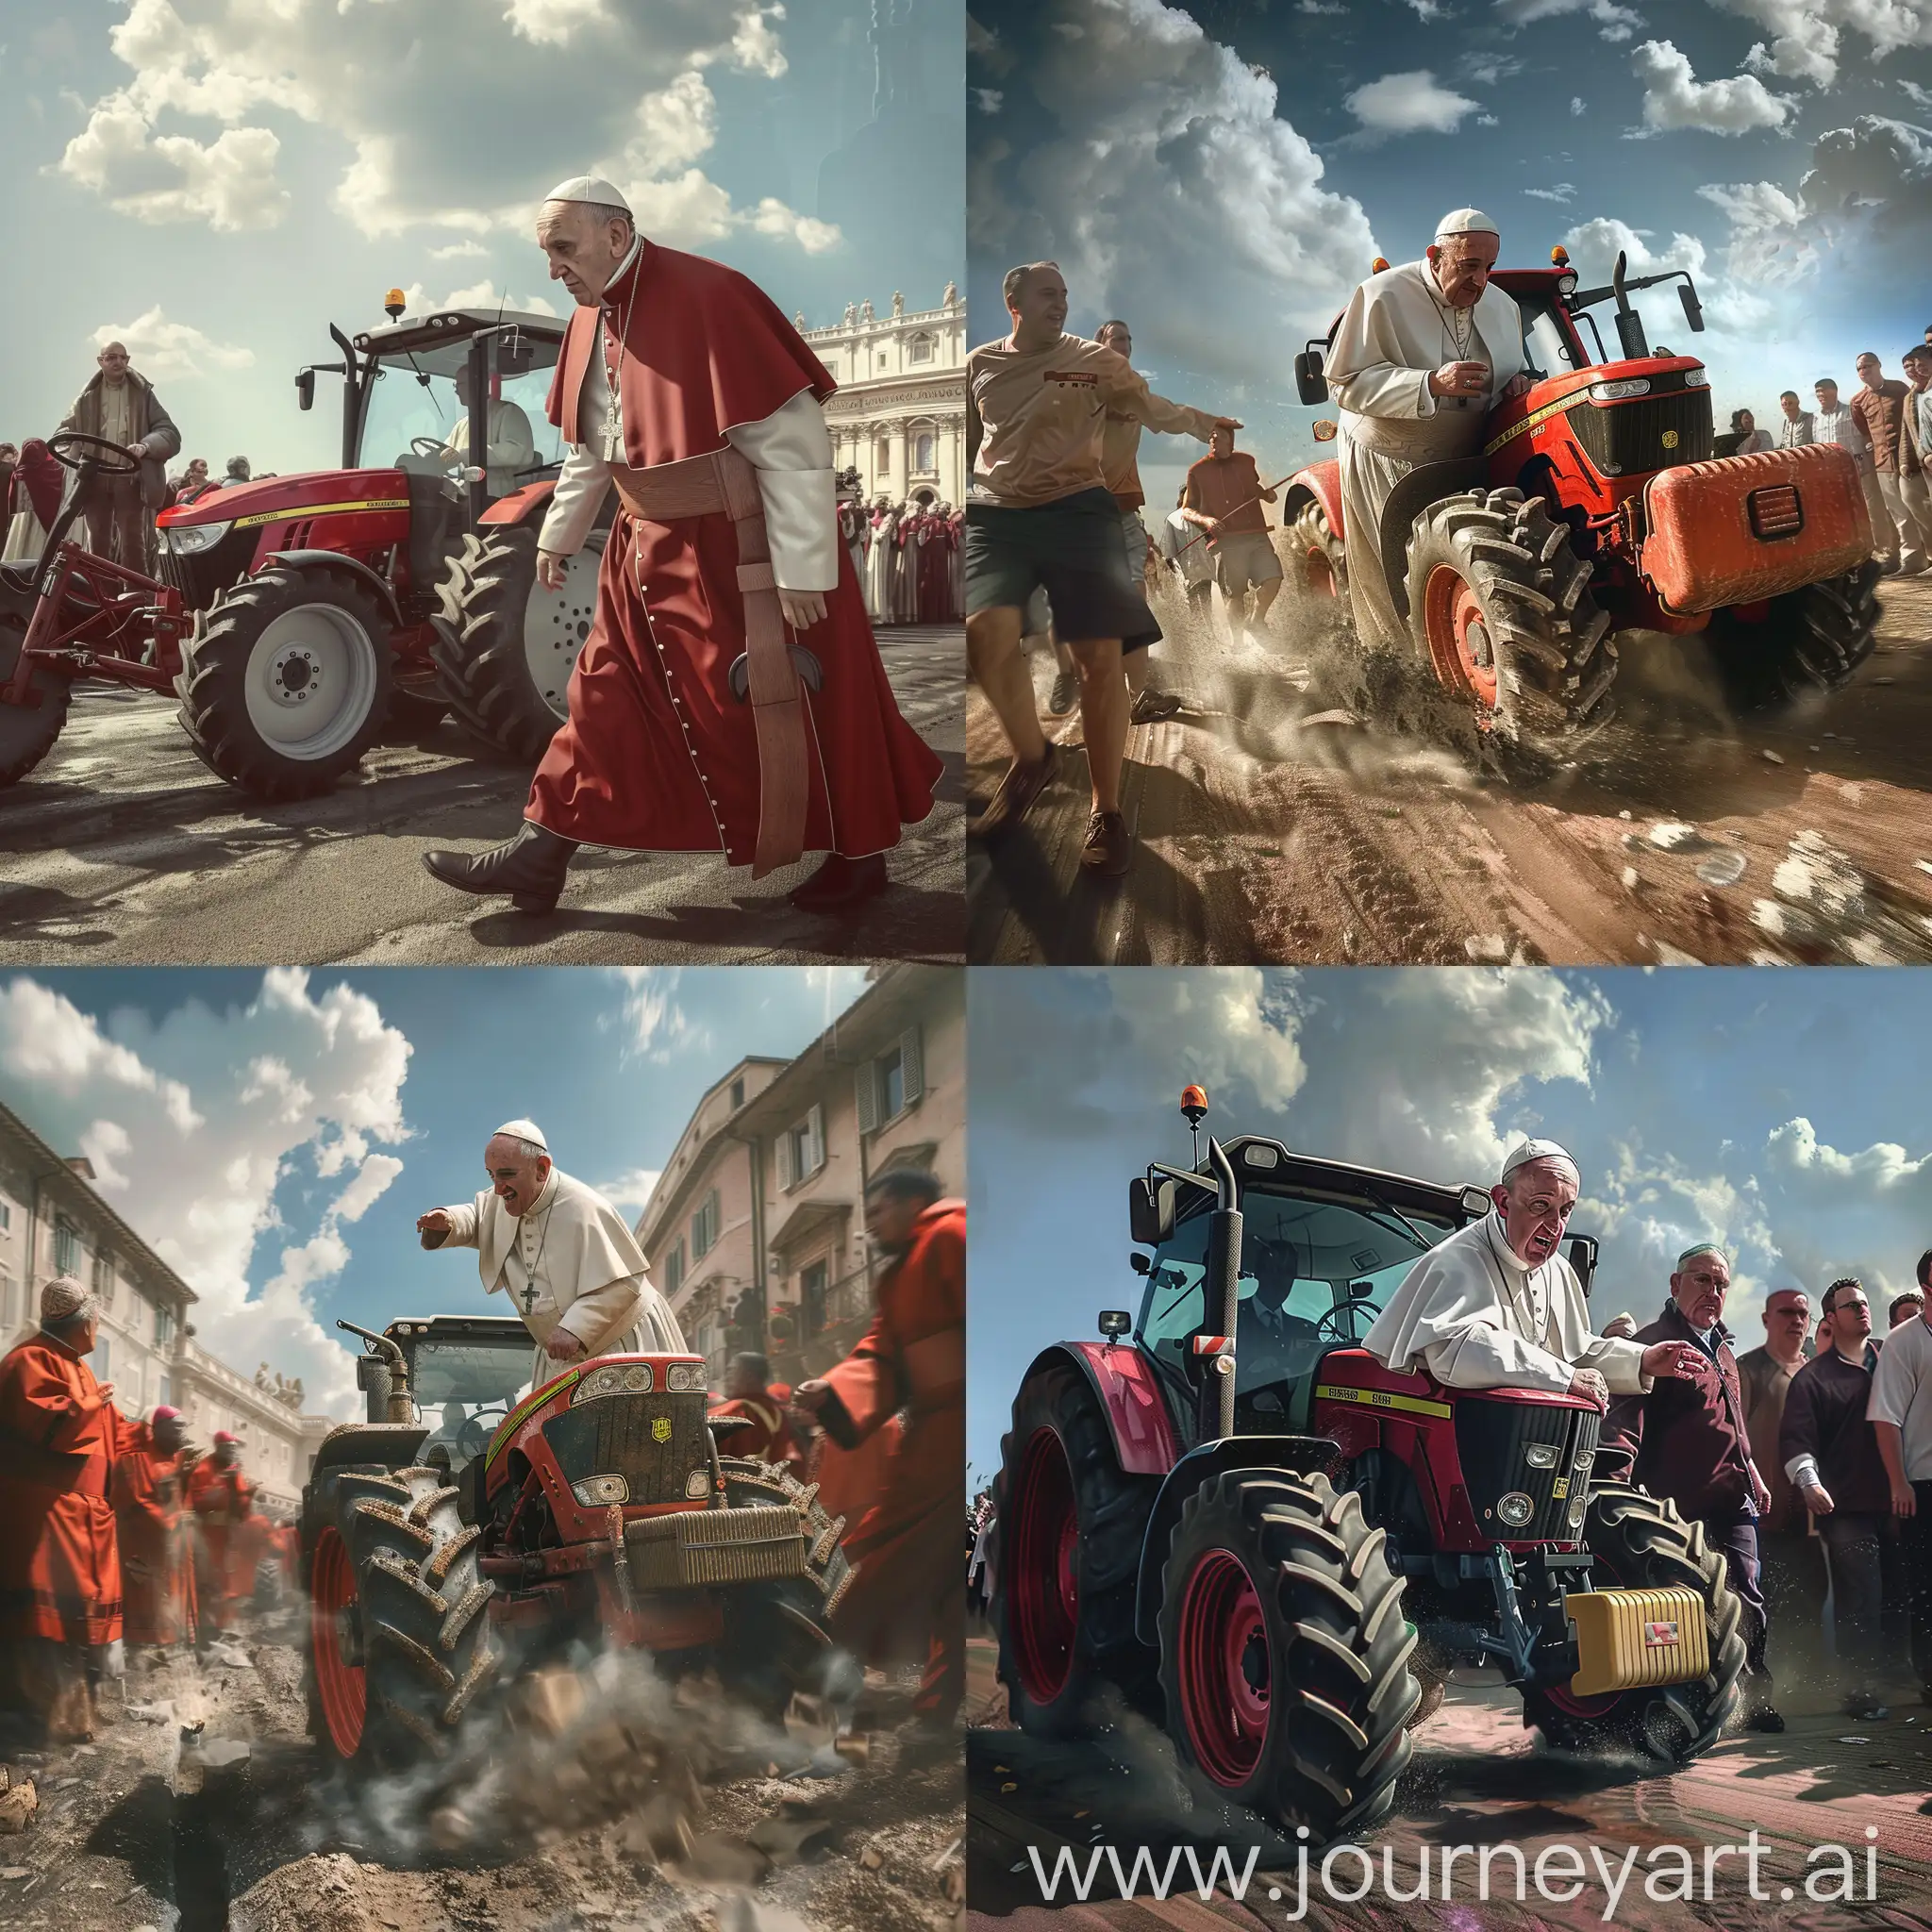 Photorealistic image of pope francis interrupting a religious procession with a tractor